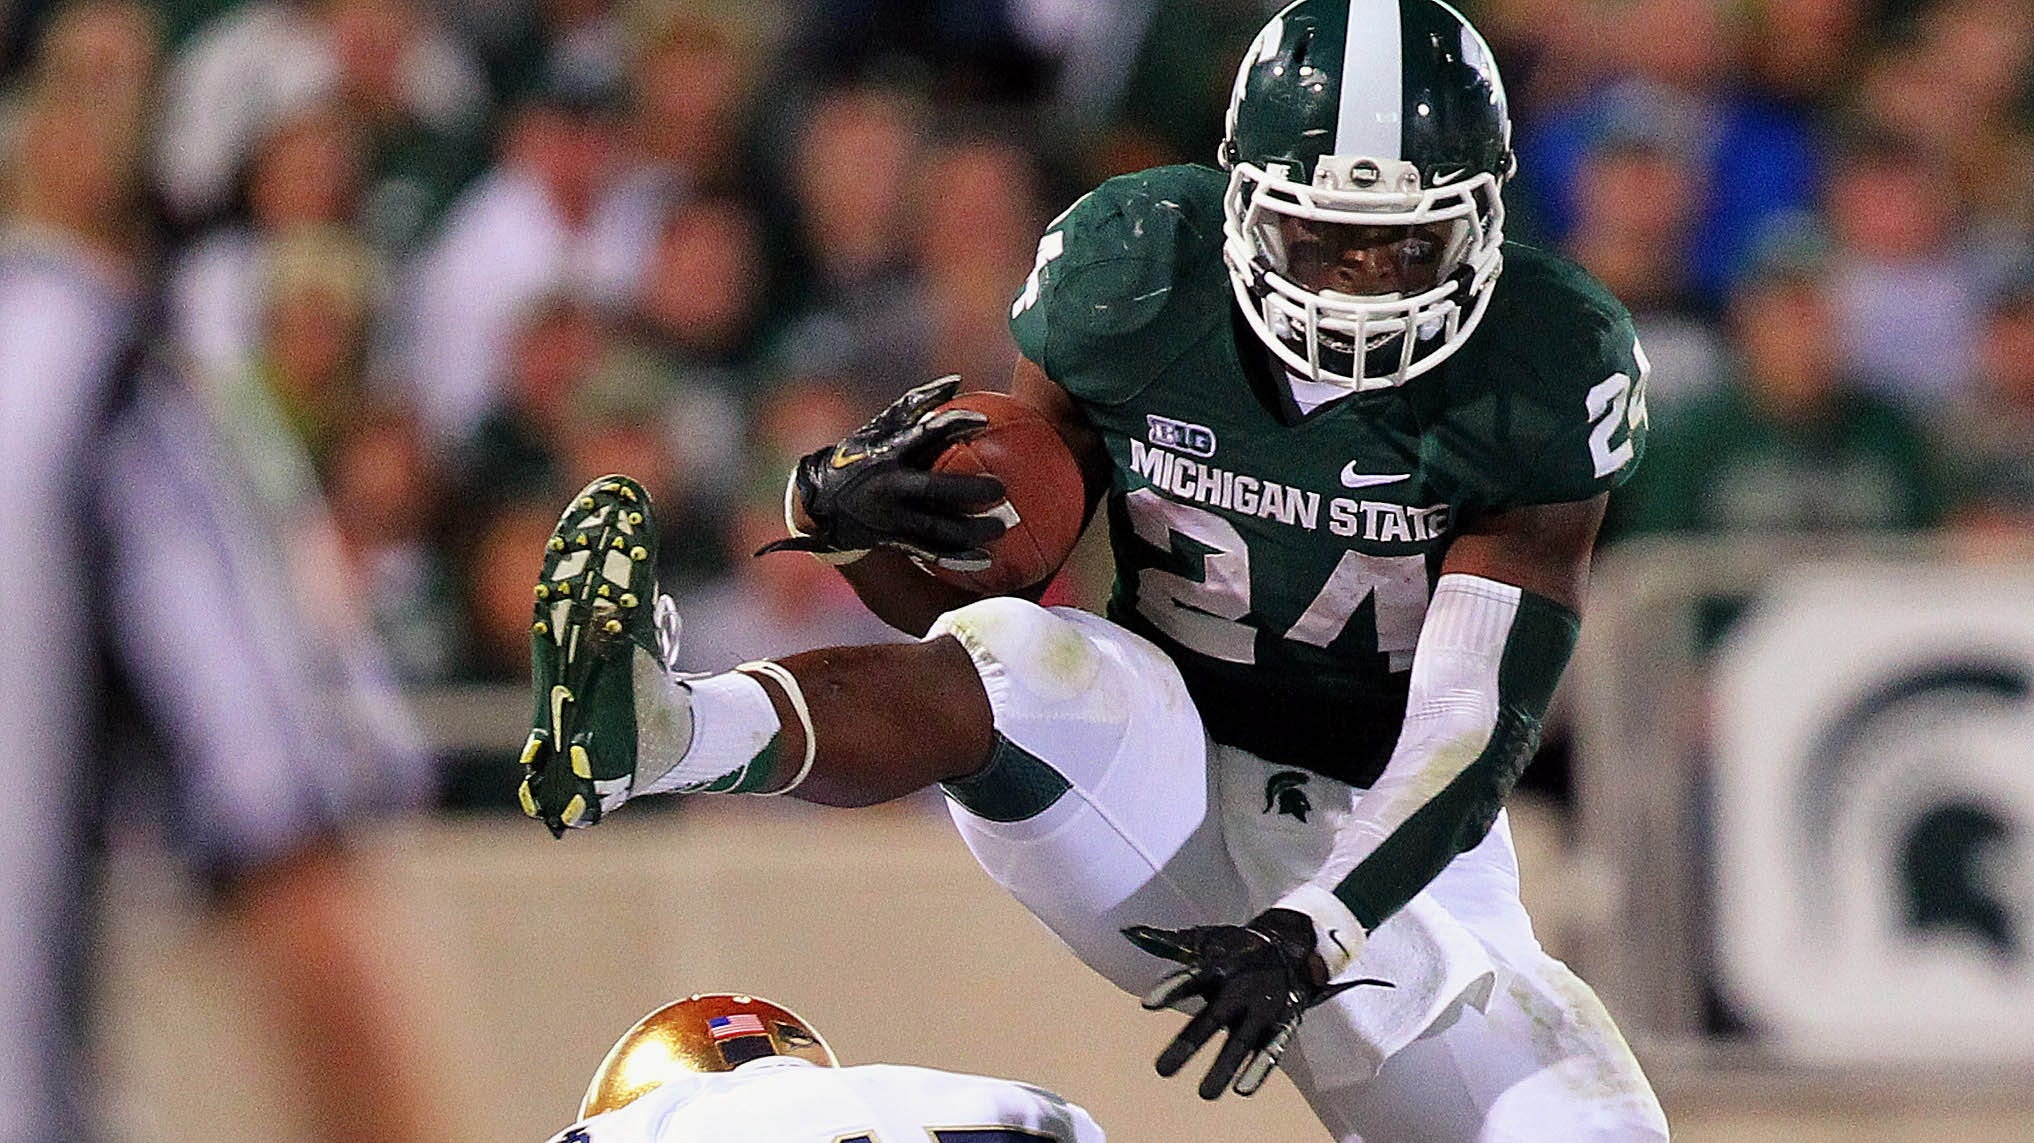 Michigan State's Le'Veon Bell slipped 